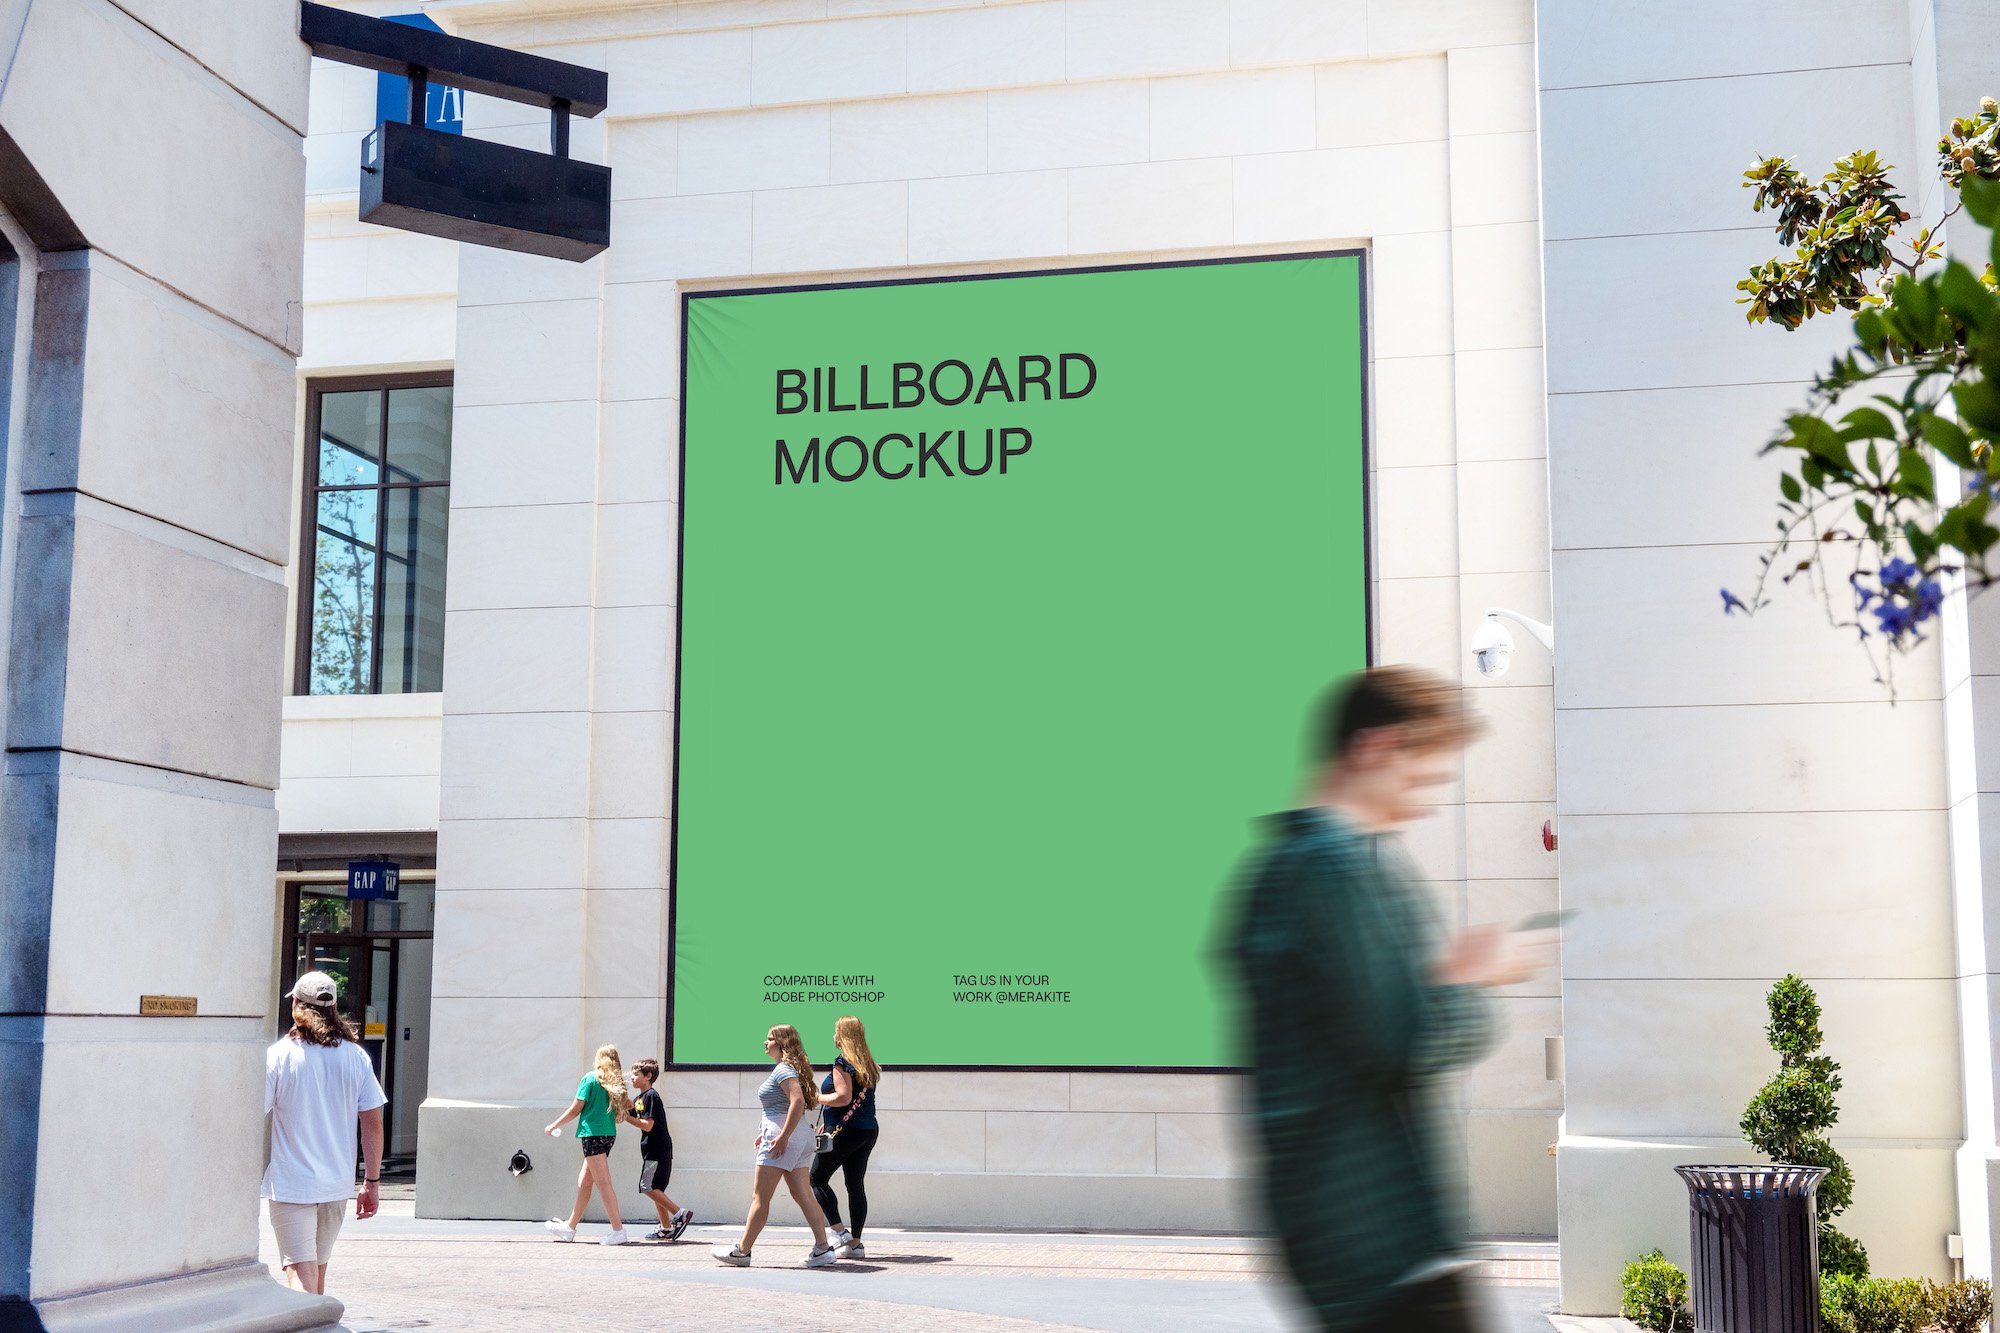 Shopping Center Sign Mockup PSD cover image.